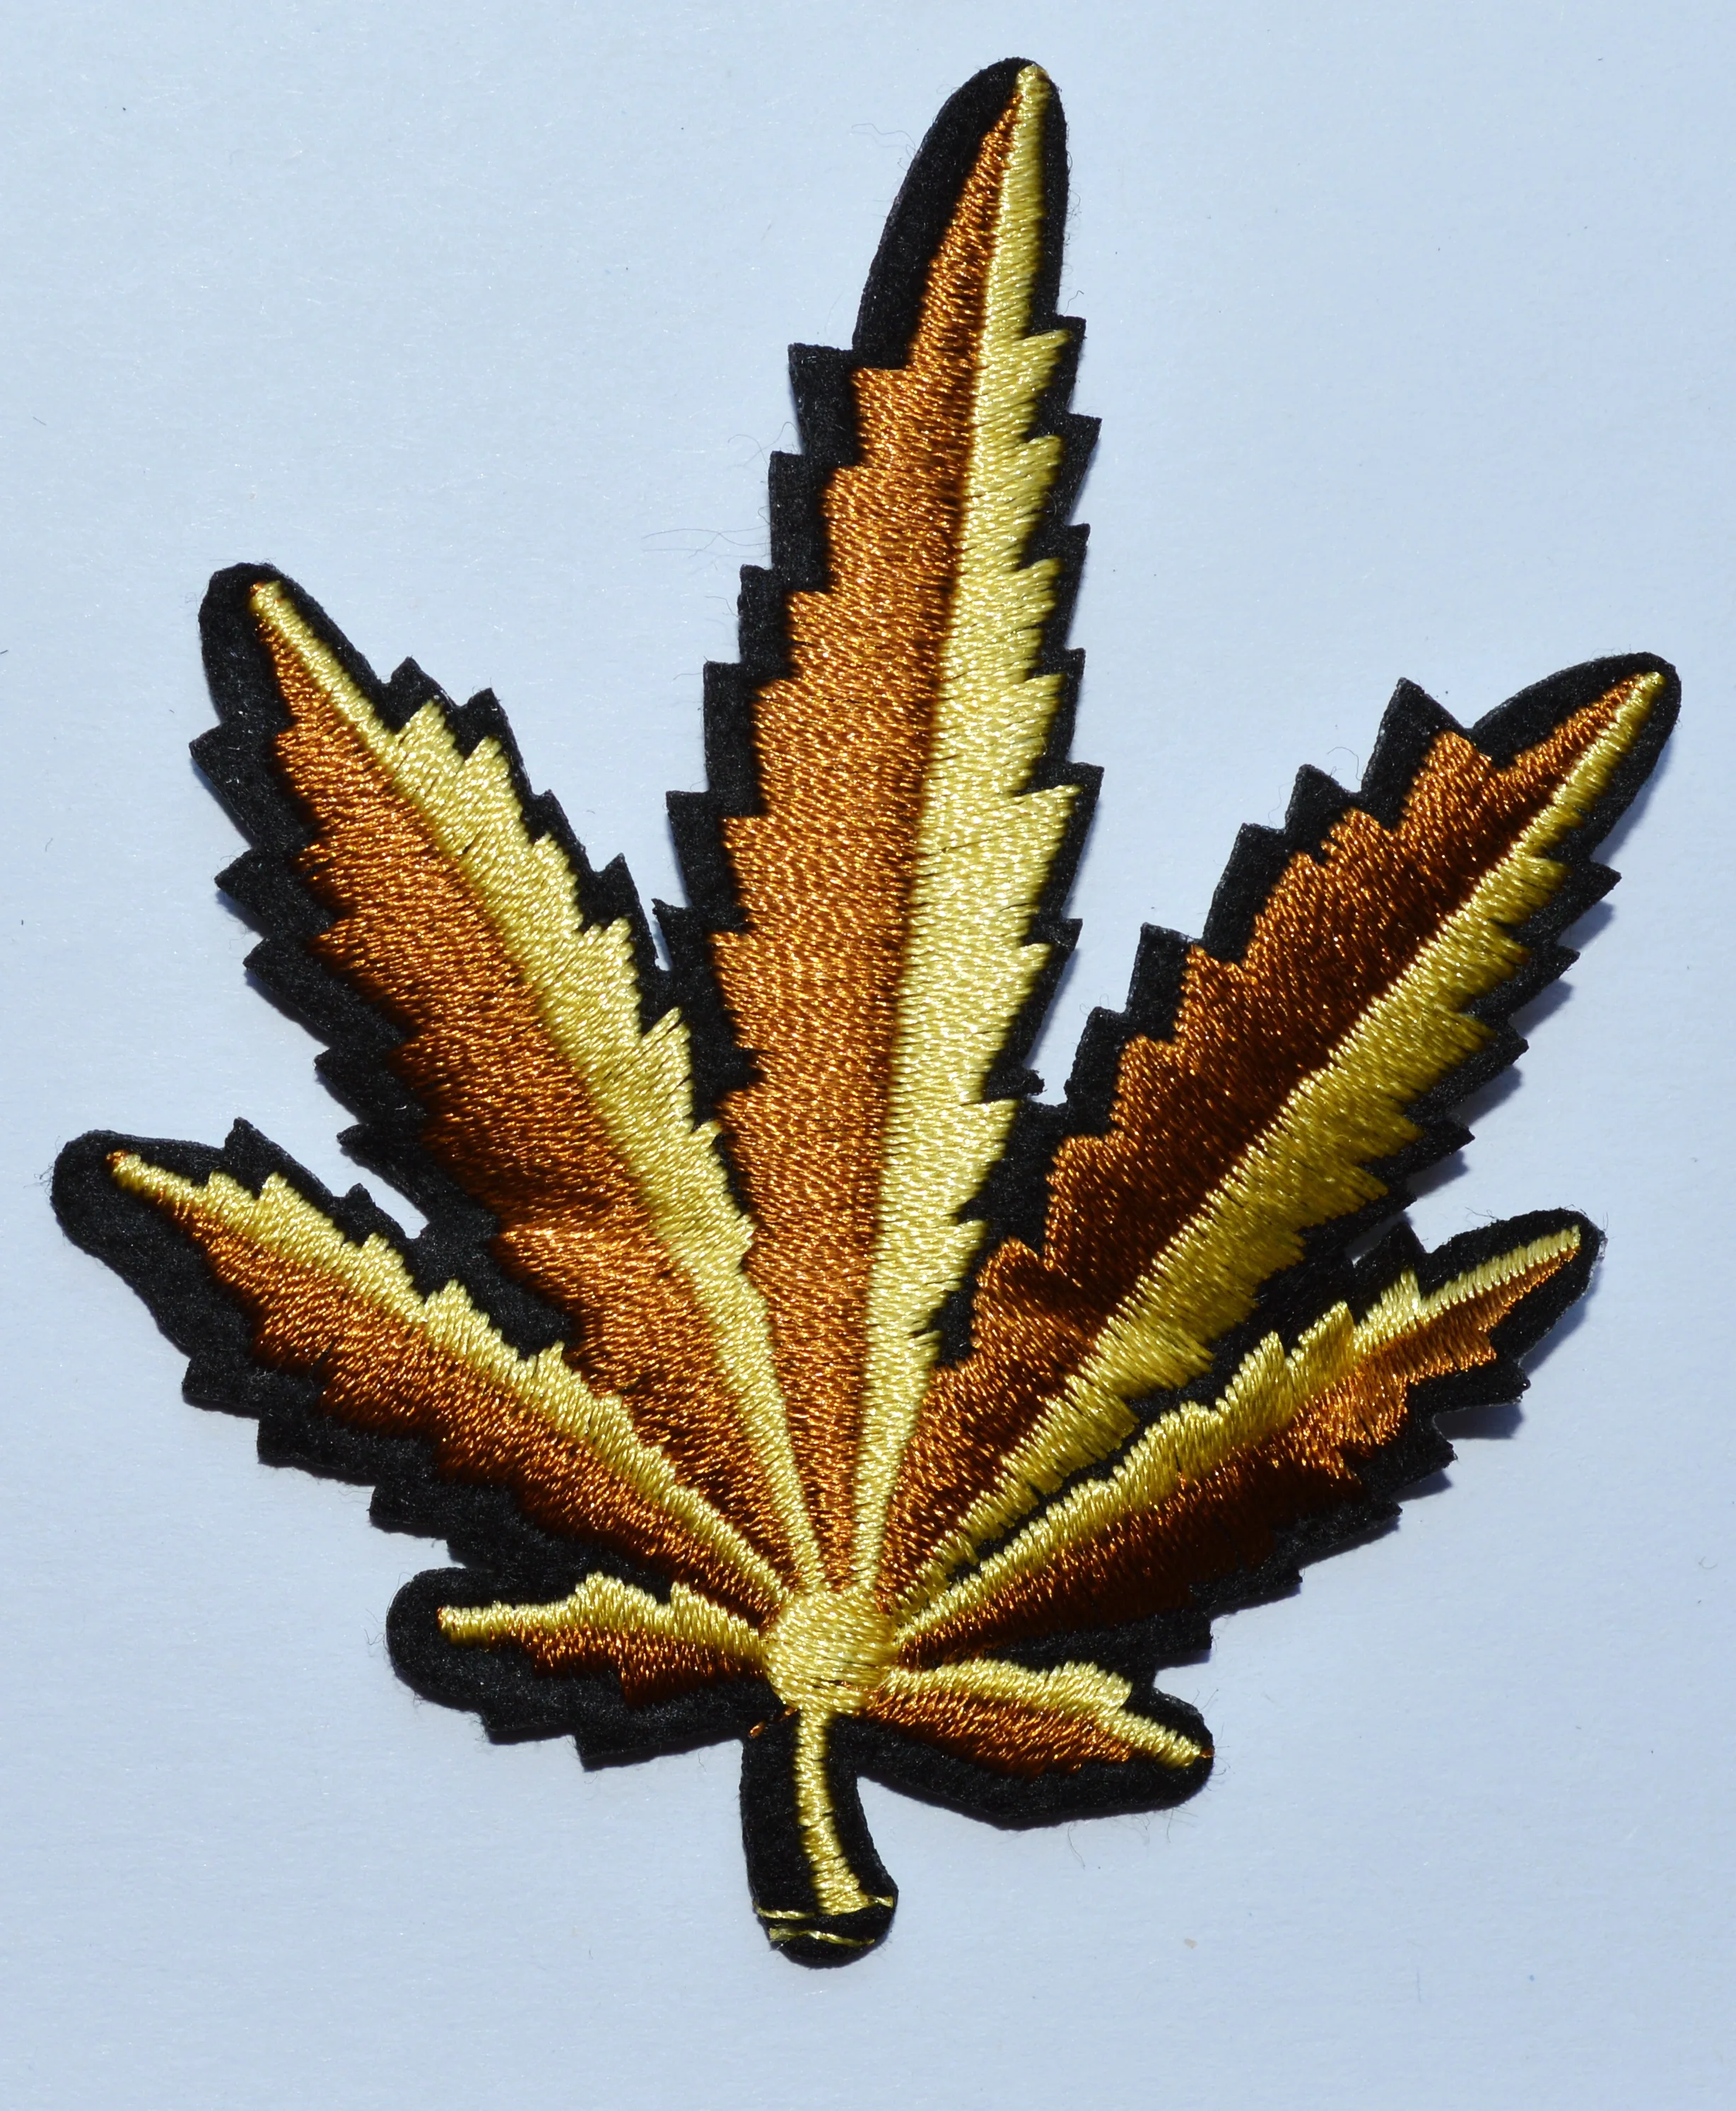 

30x Golden Pot leaf boho hippie retro weed applique Embroidery iron-on patch new, iron on patch punk bike biker Sewing Hippie